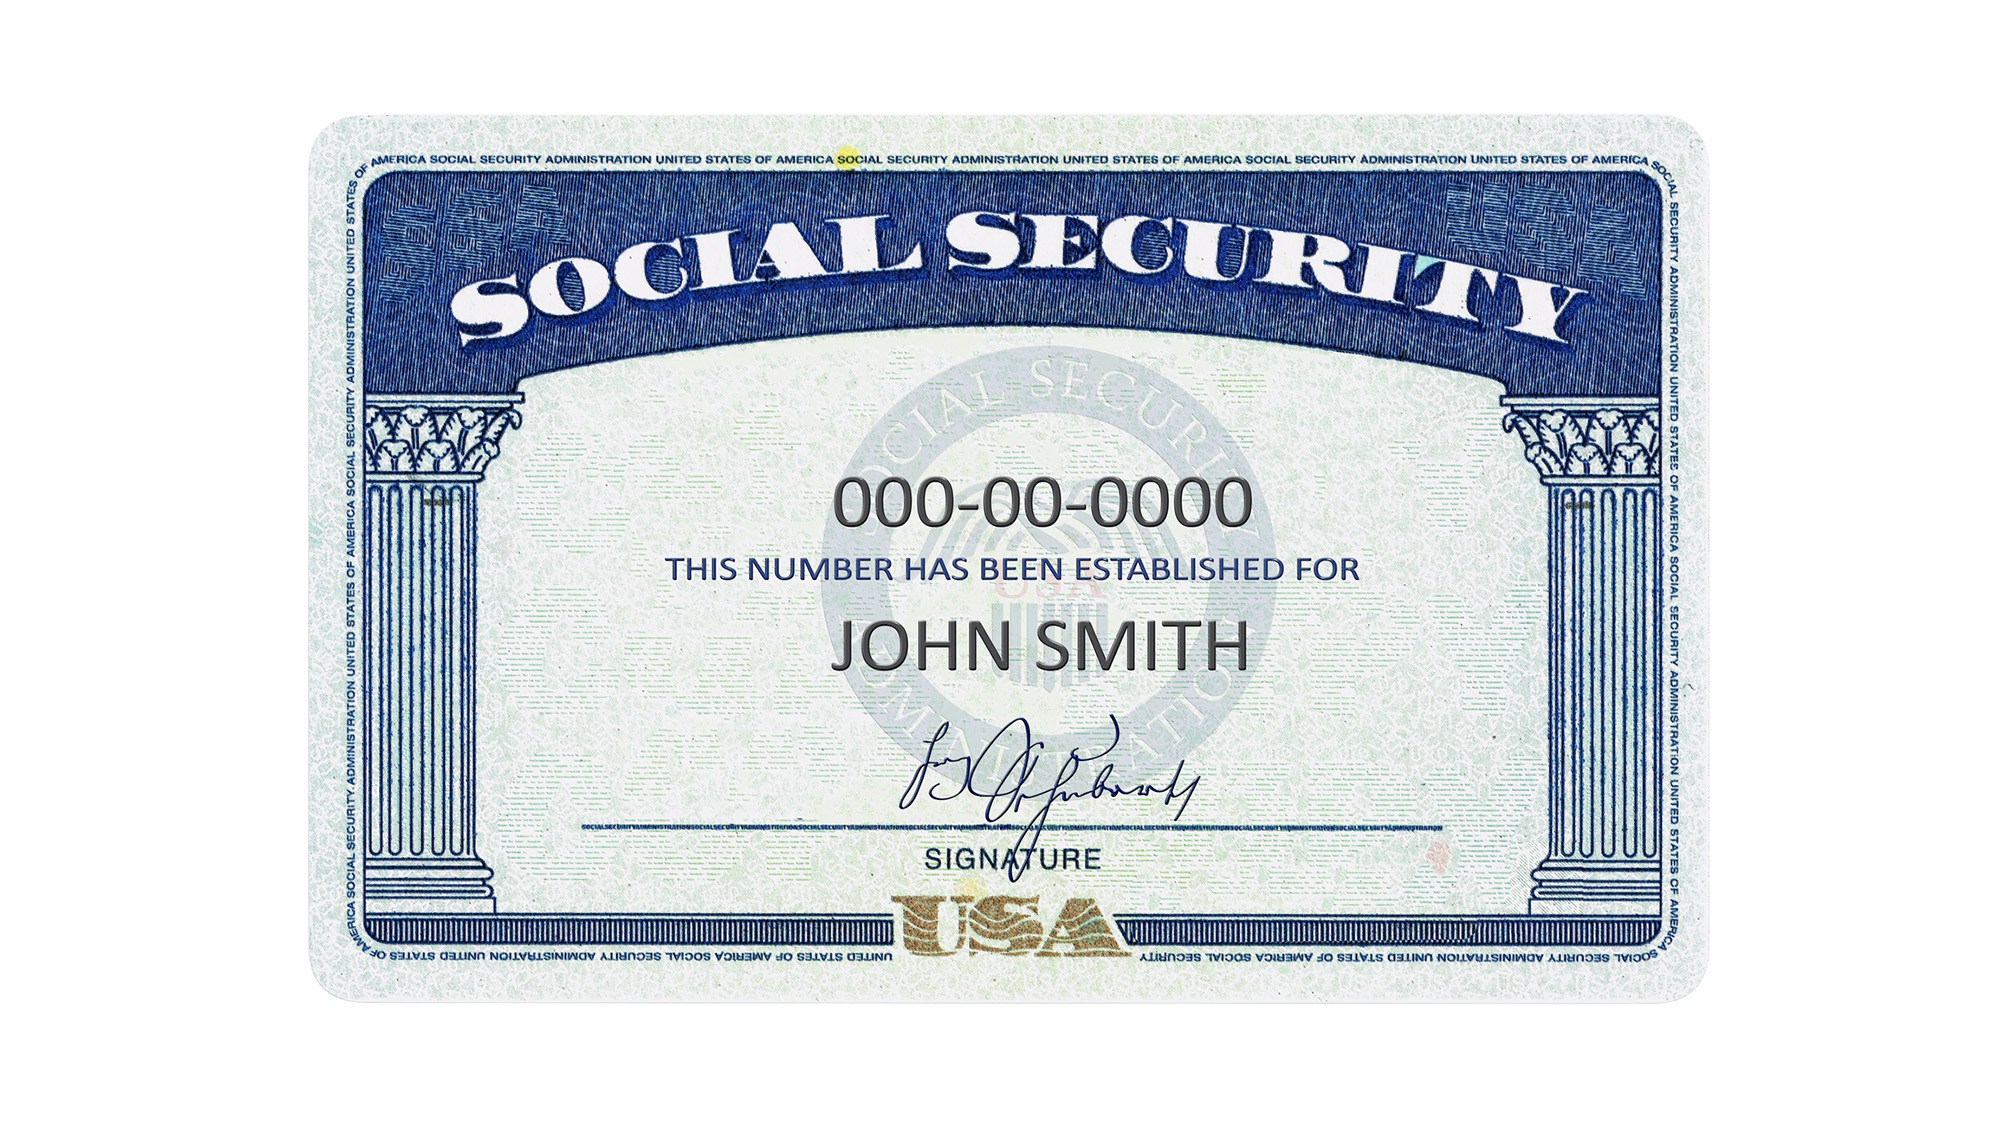 social-security-need-to-change-your-name-on-your-social-security-card